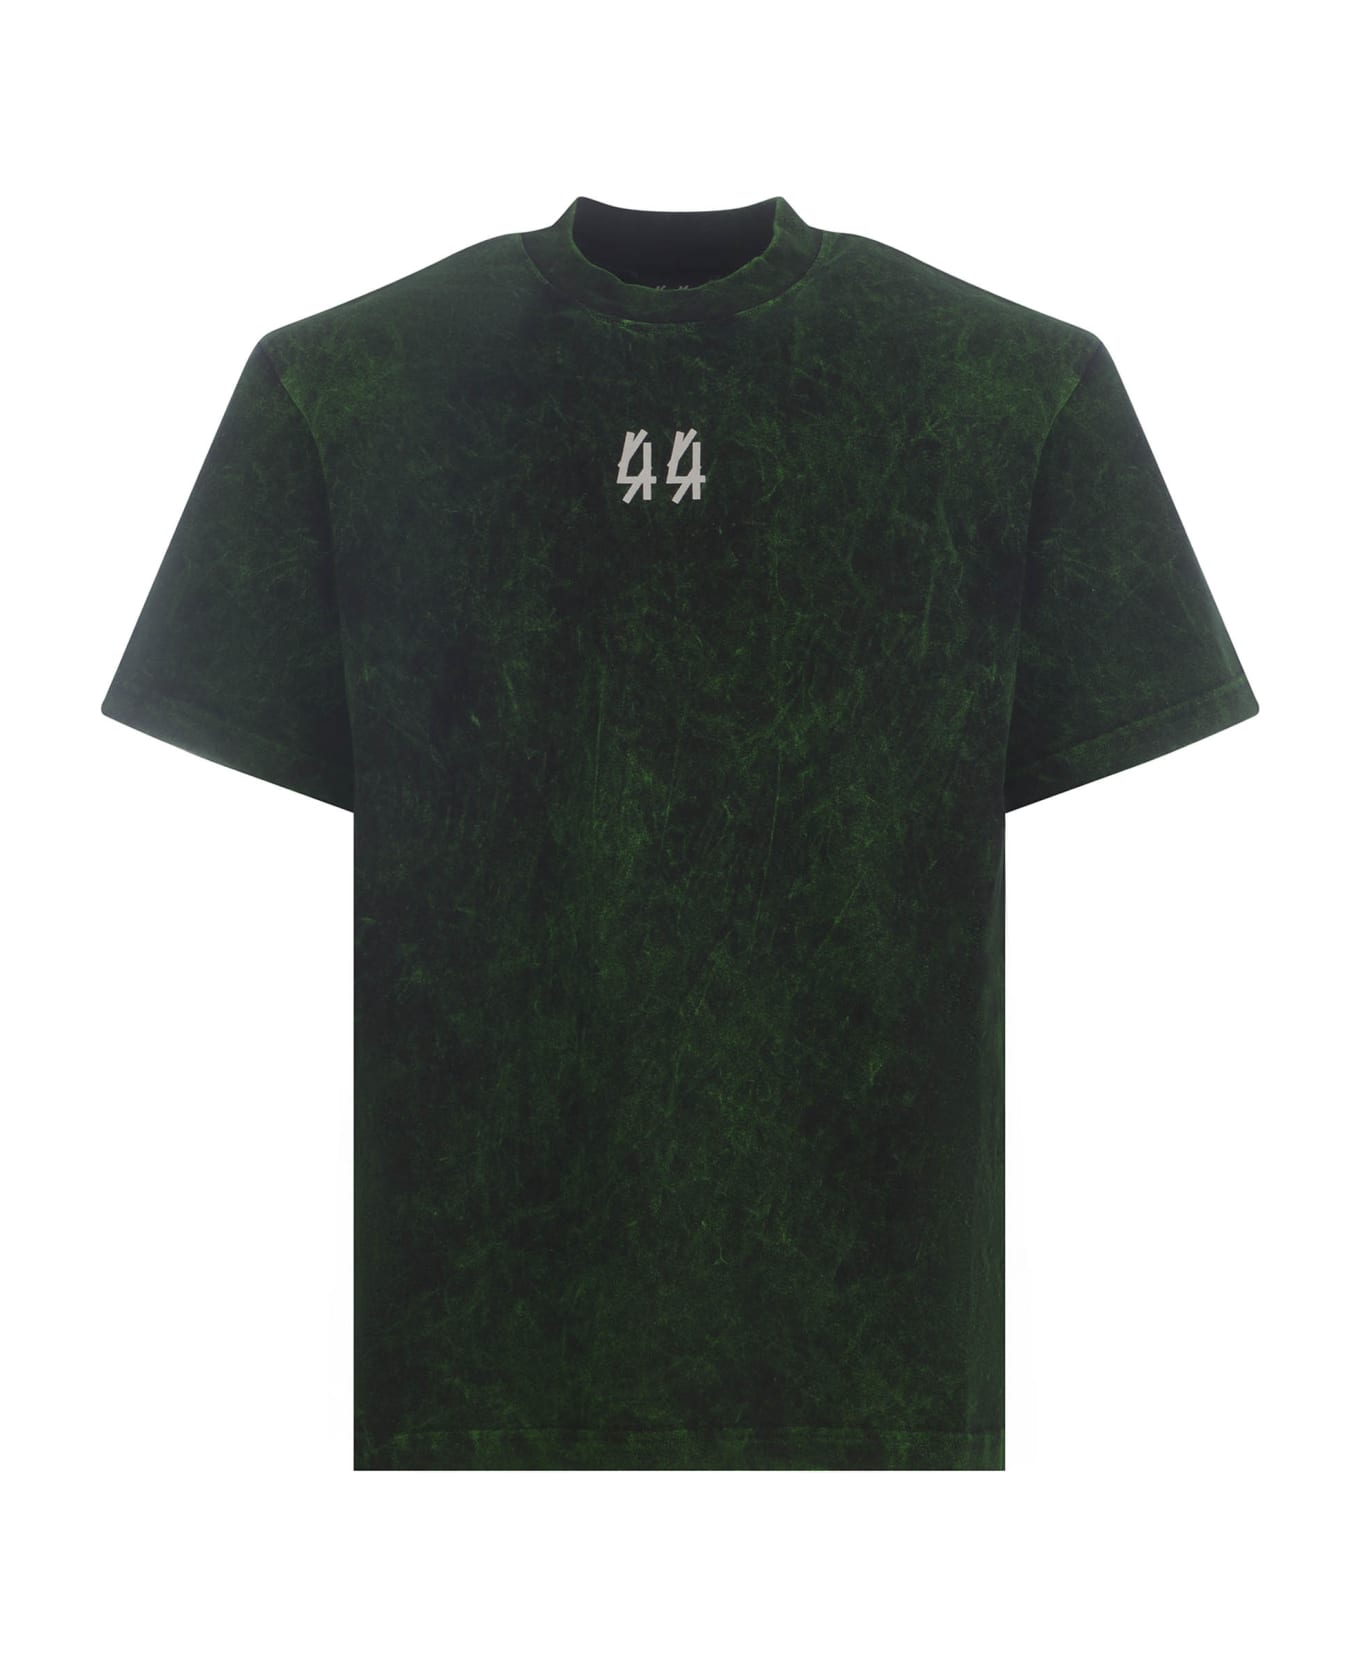 44 Label Group T-shirt 44 Label Group "t-solare" Made Of Cotton - Verde